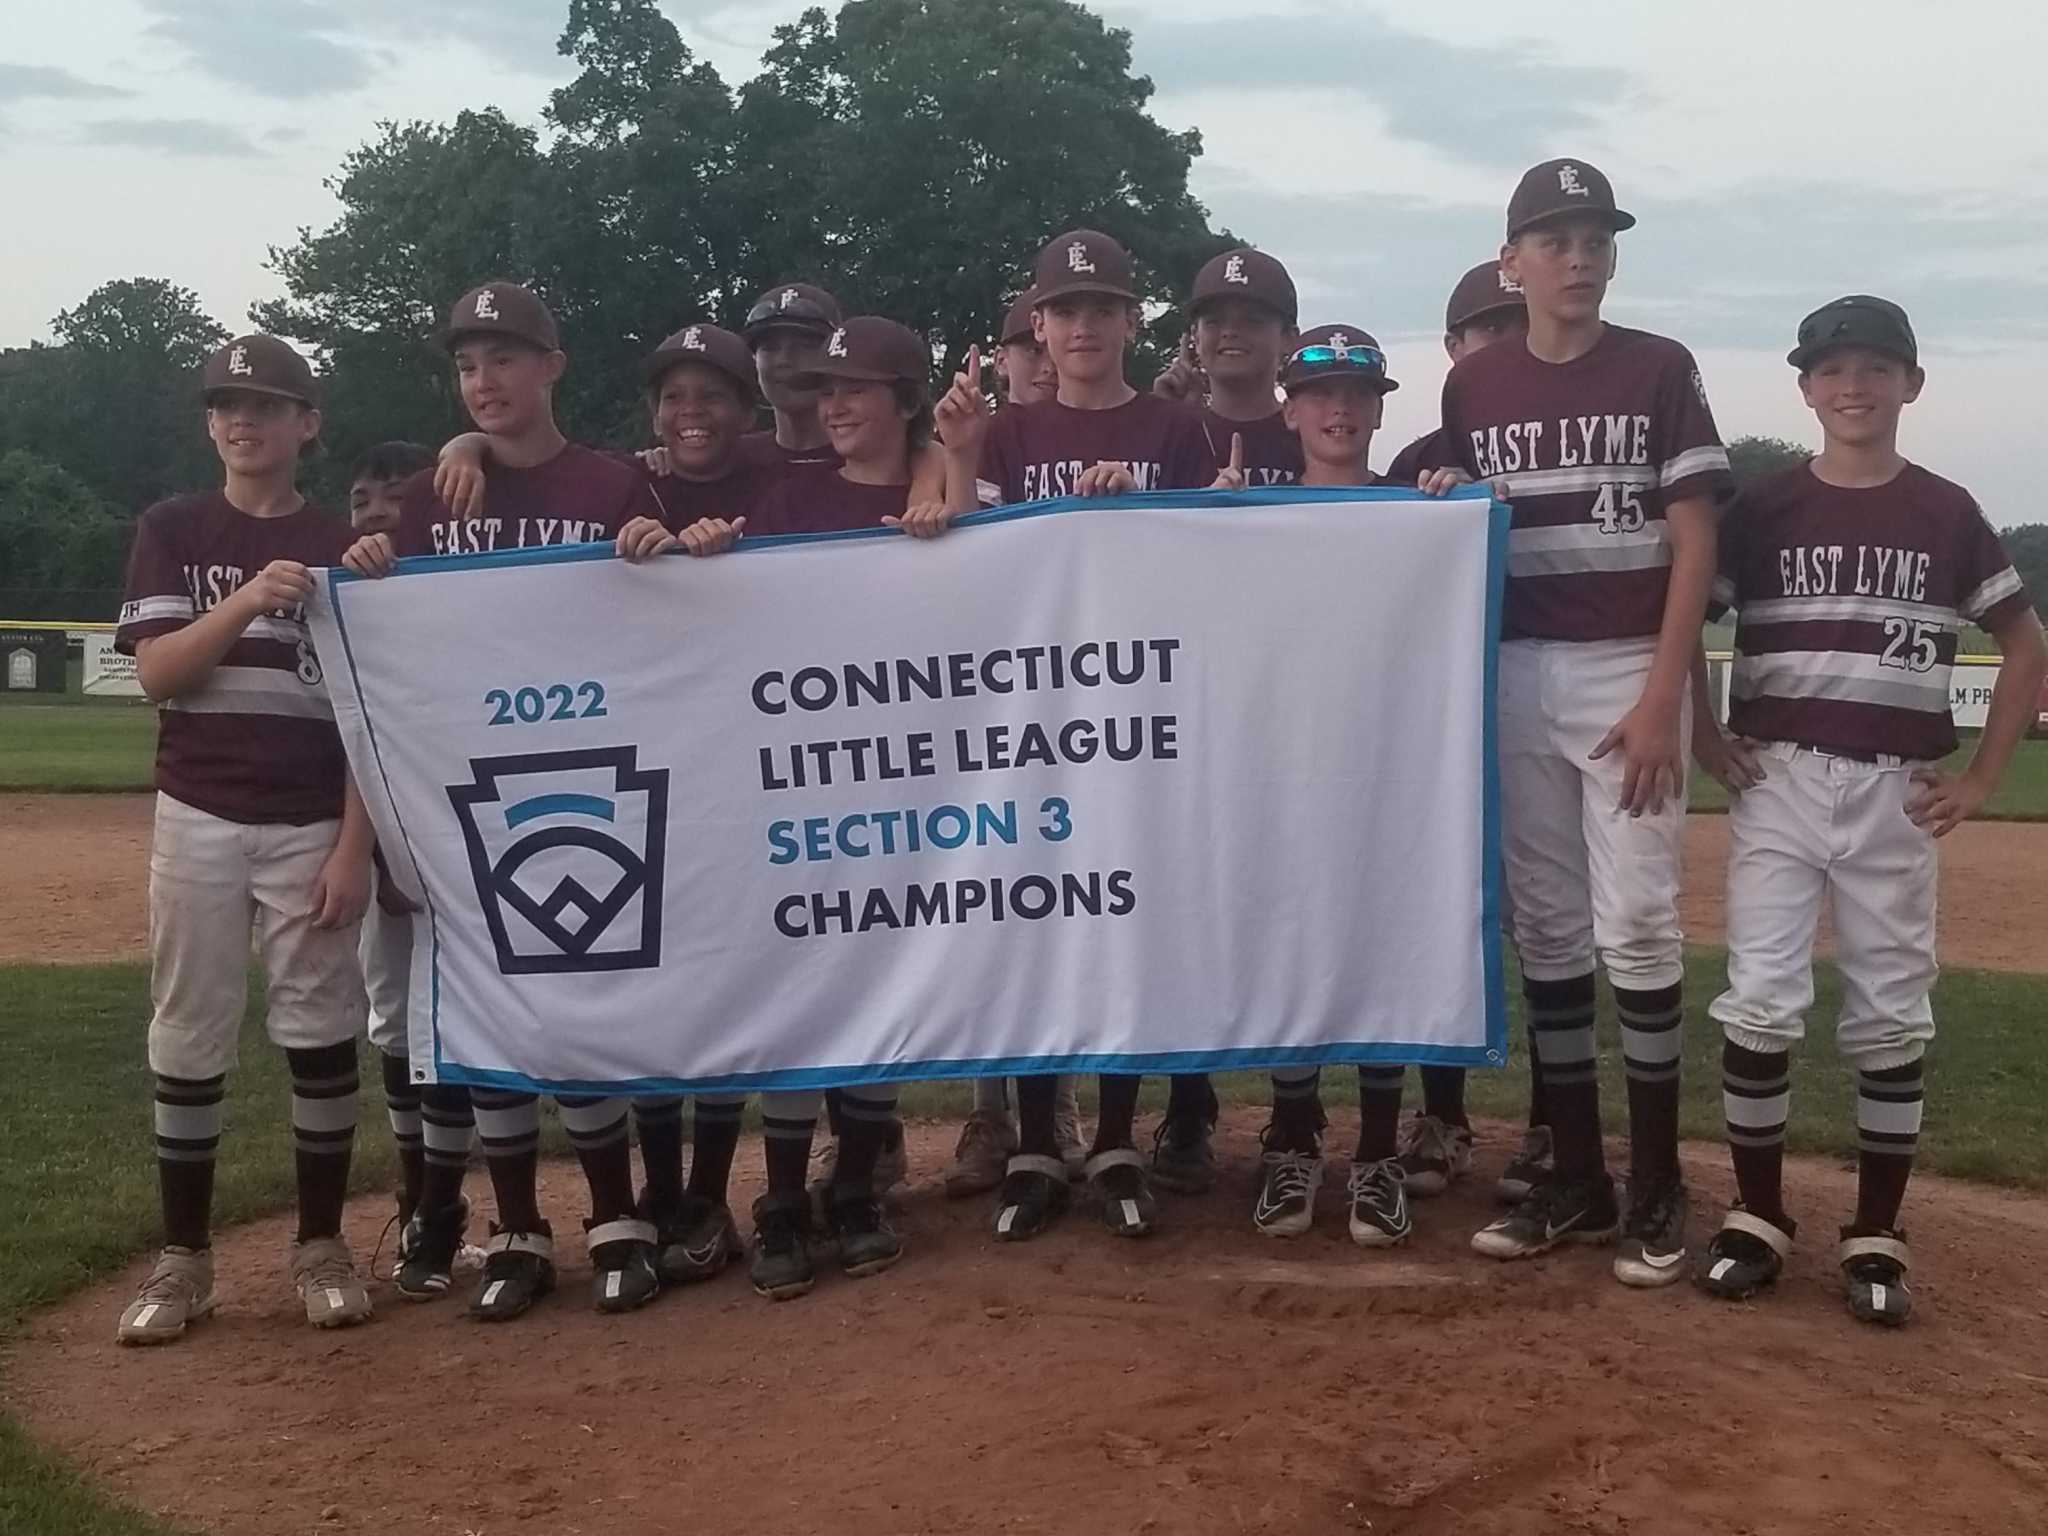 Media Little League romps, takes state title